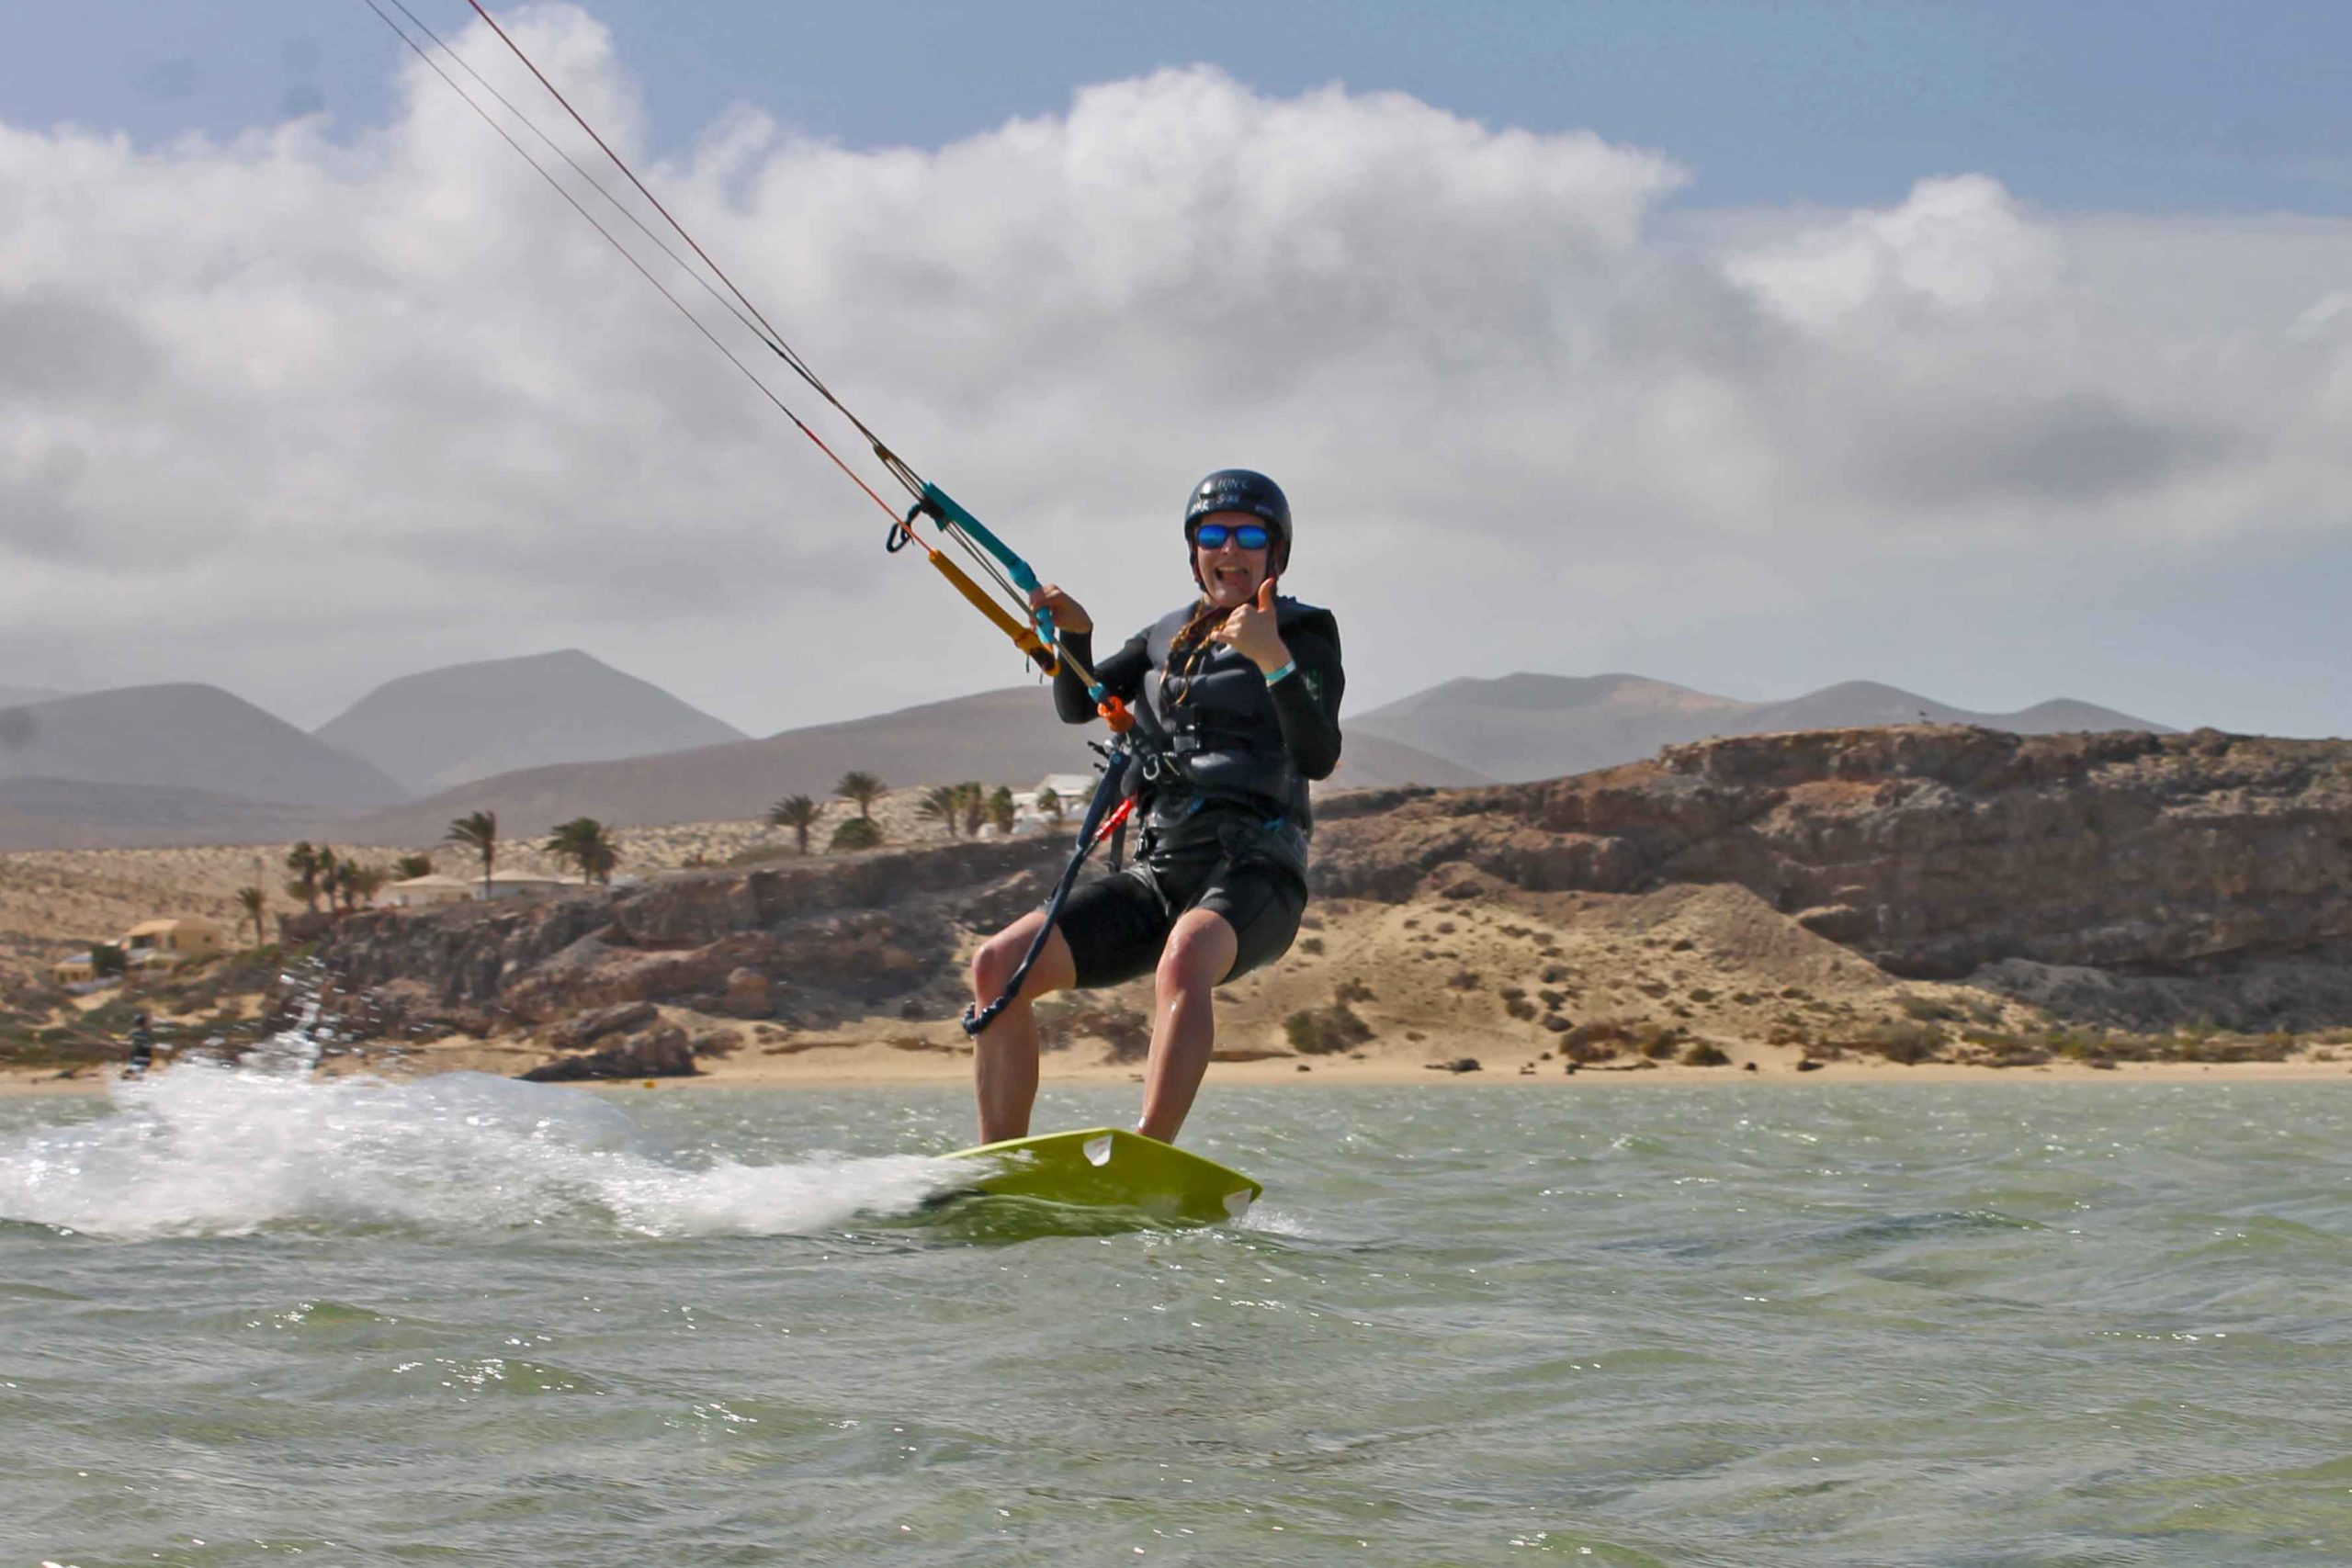 A happy guest learn kitesurf on the spot in front of ION CLUB Risco del Paso